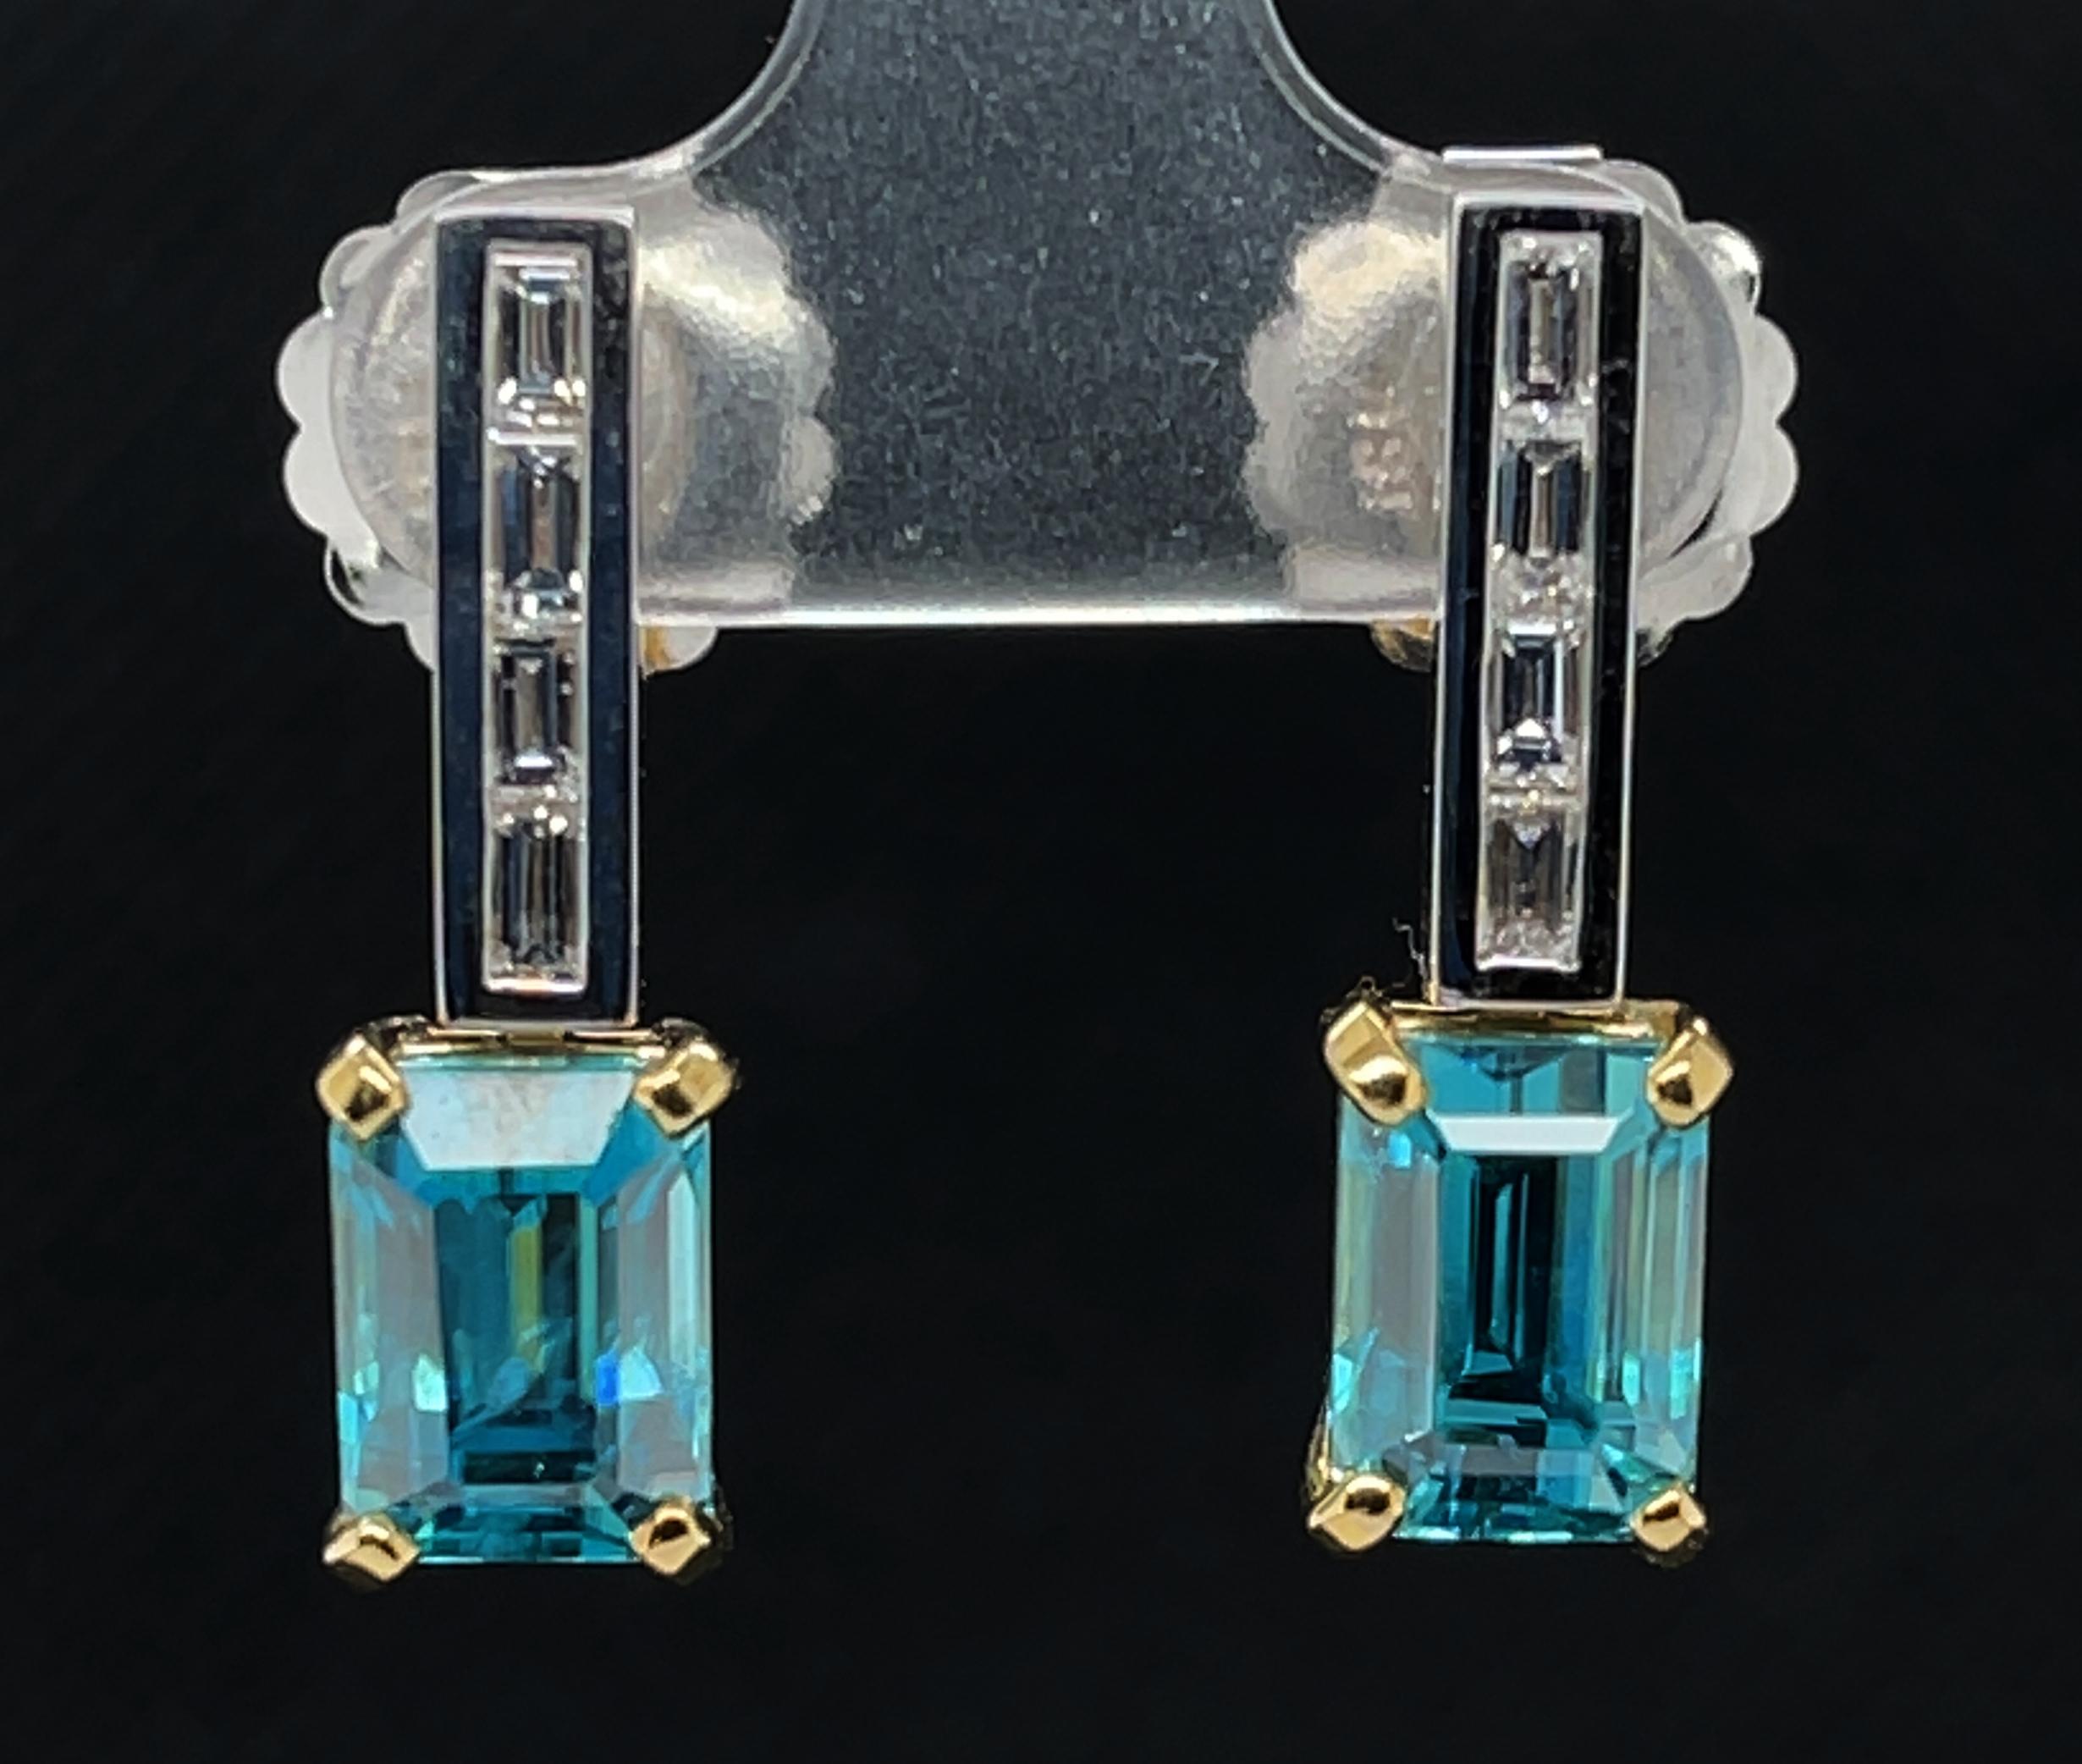 Vibrant peacock blue zircons are featured in these beautiful, Art Deco inspired earrings. The zircons are exceptionally fine quality and perfectly matched; set with baguette cut diamonds these earrings are spectacular! Part of our exclusive 